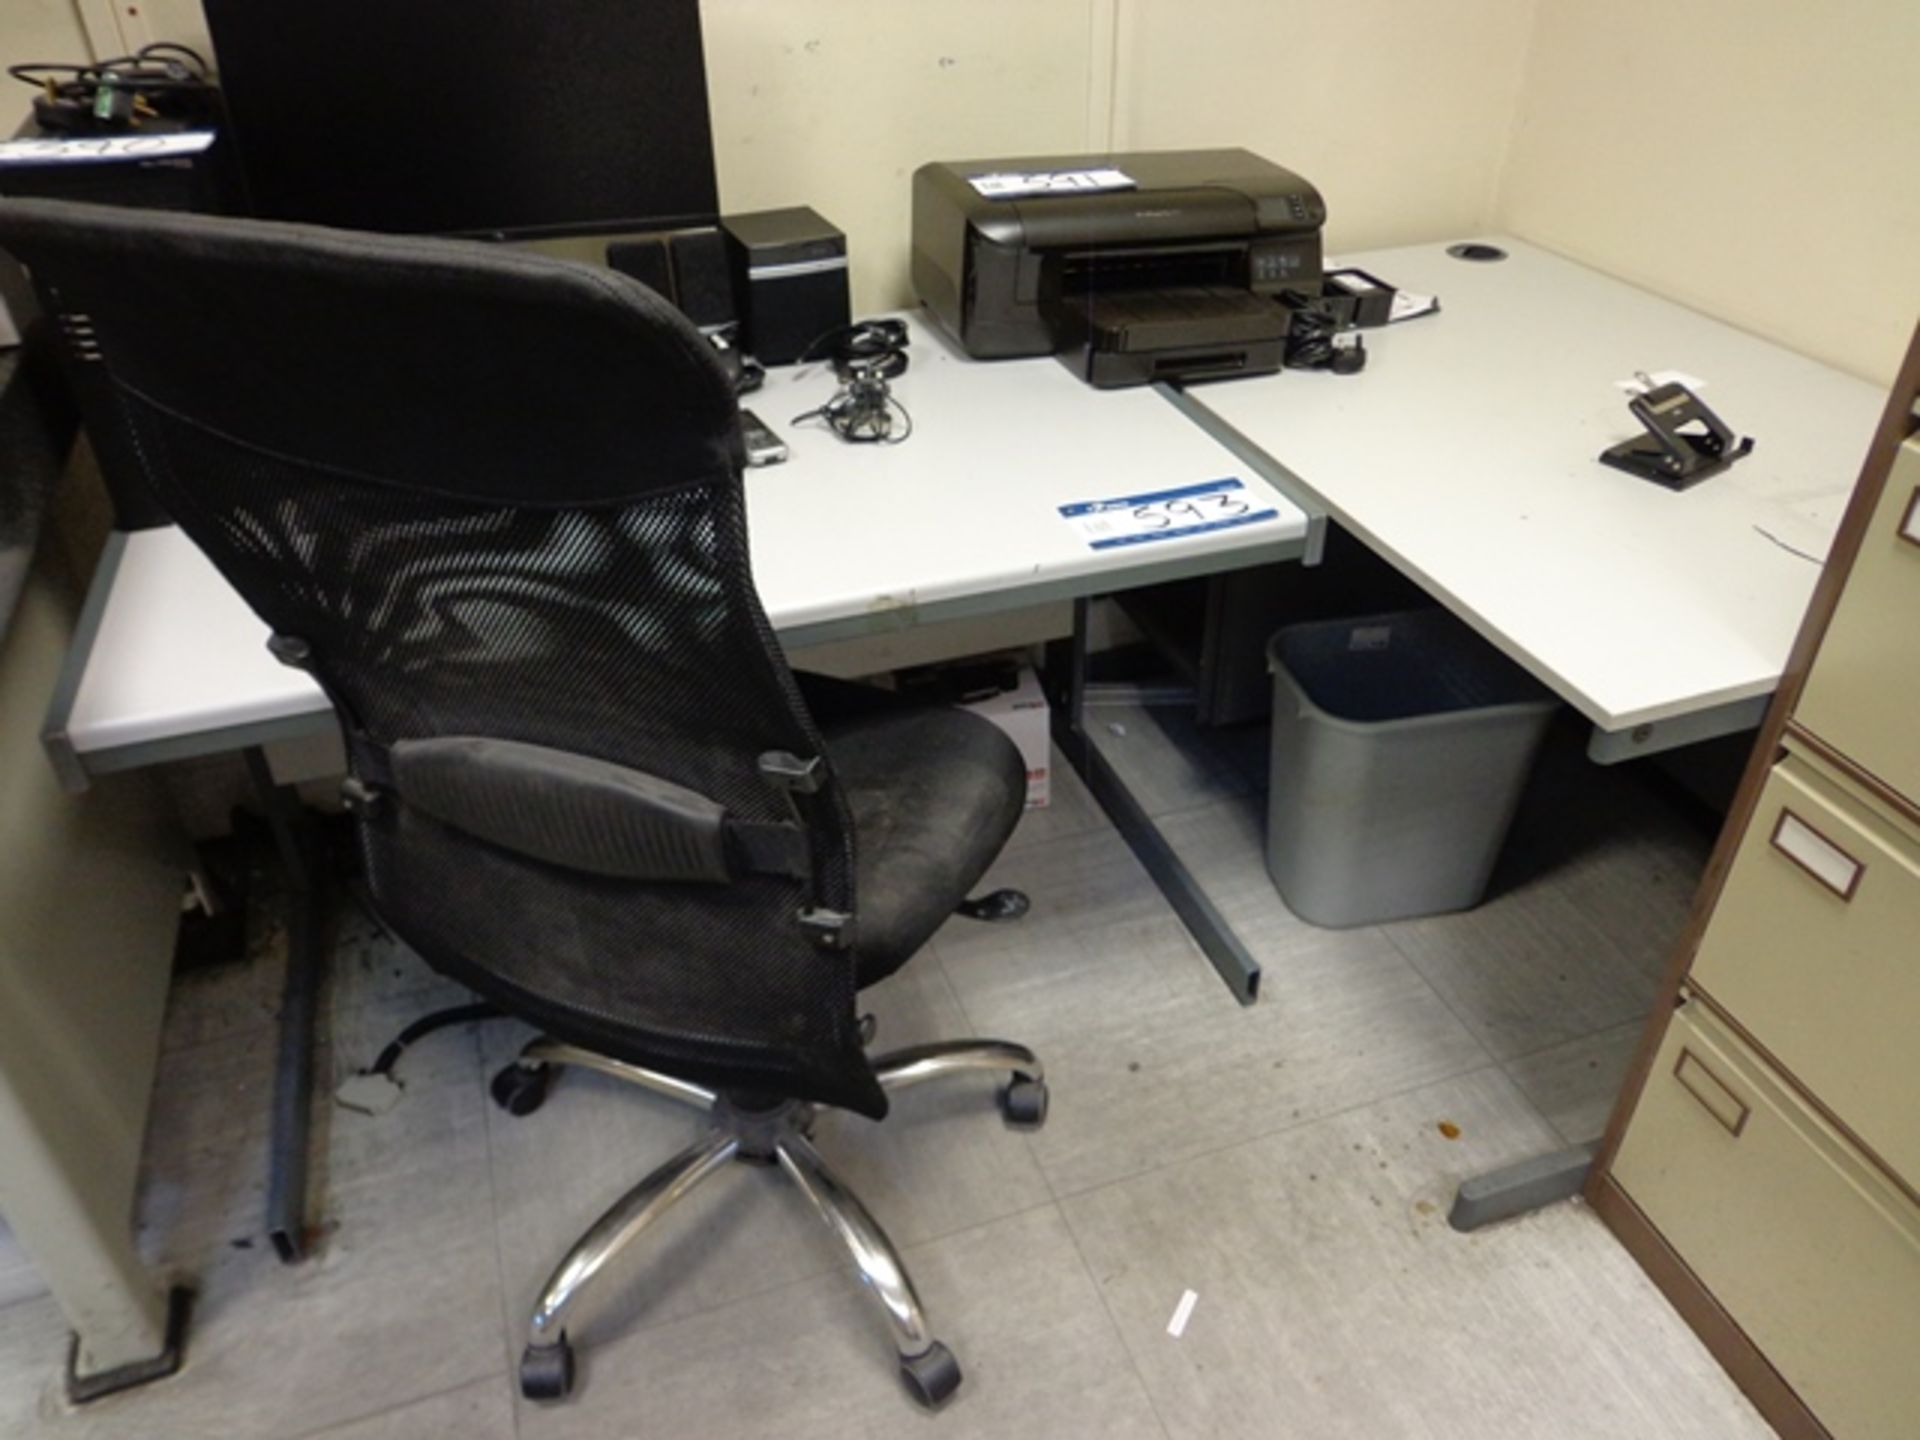 Two Grey Melamine Desks and Office Chair